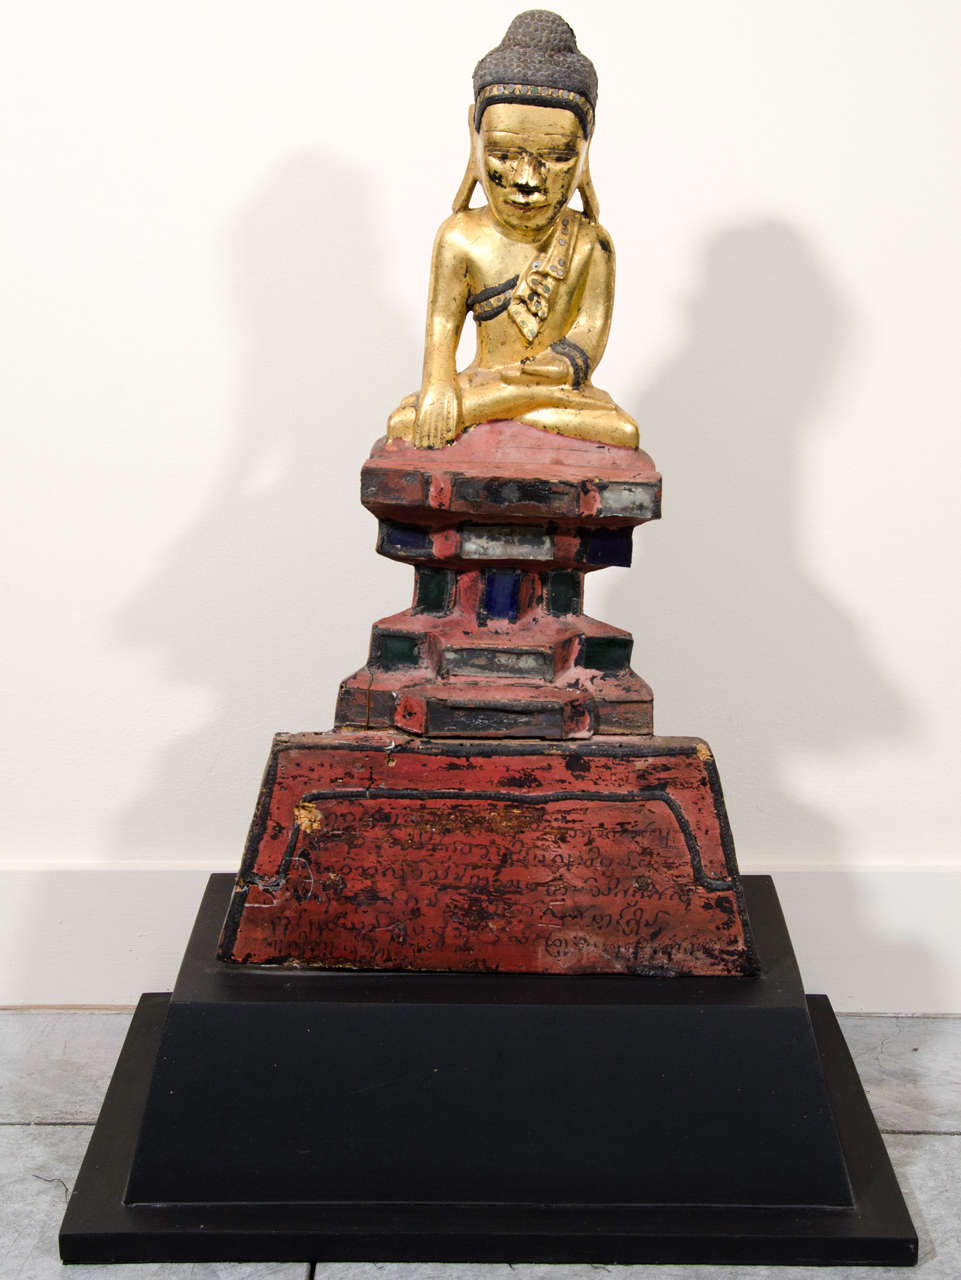 An unusual Karen Buddha atop red pedestal with Buddhist scripture in Burmese characters. From Burma c. 1900.
BH440a